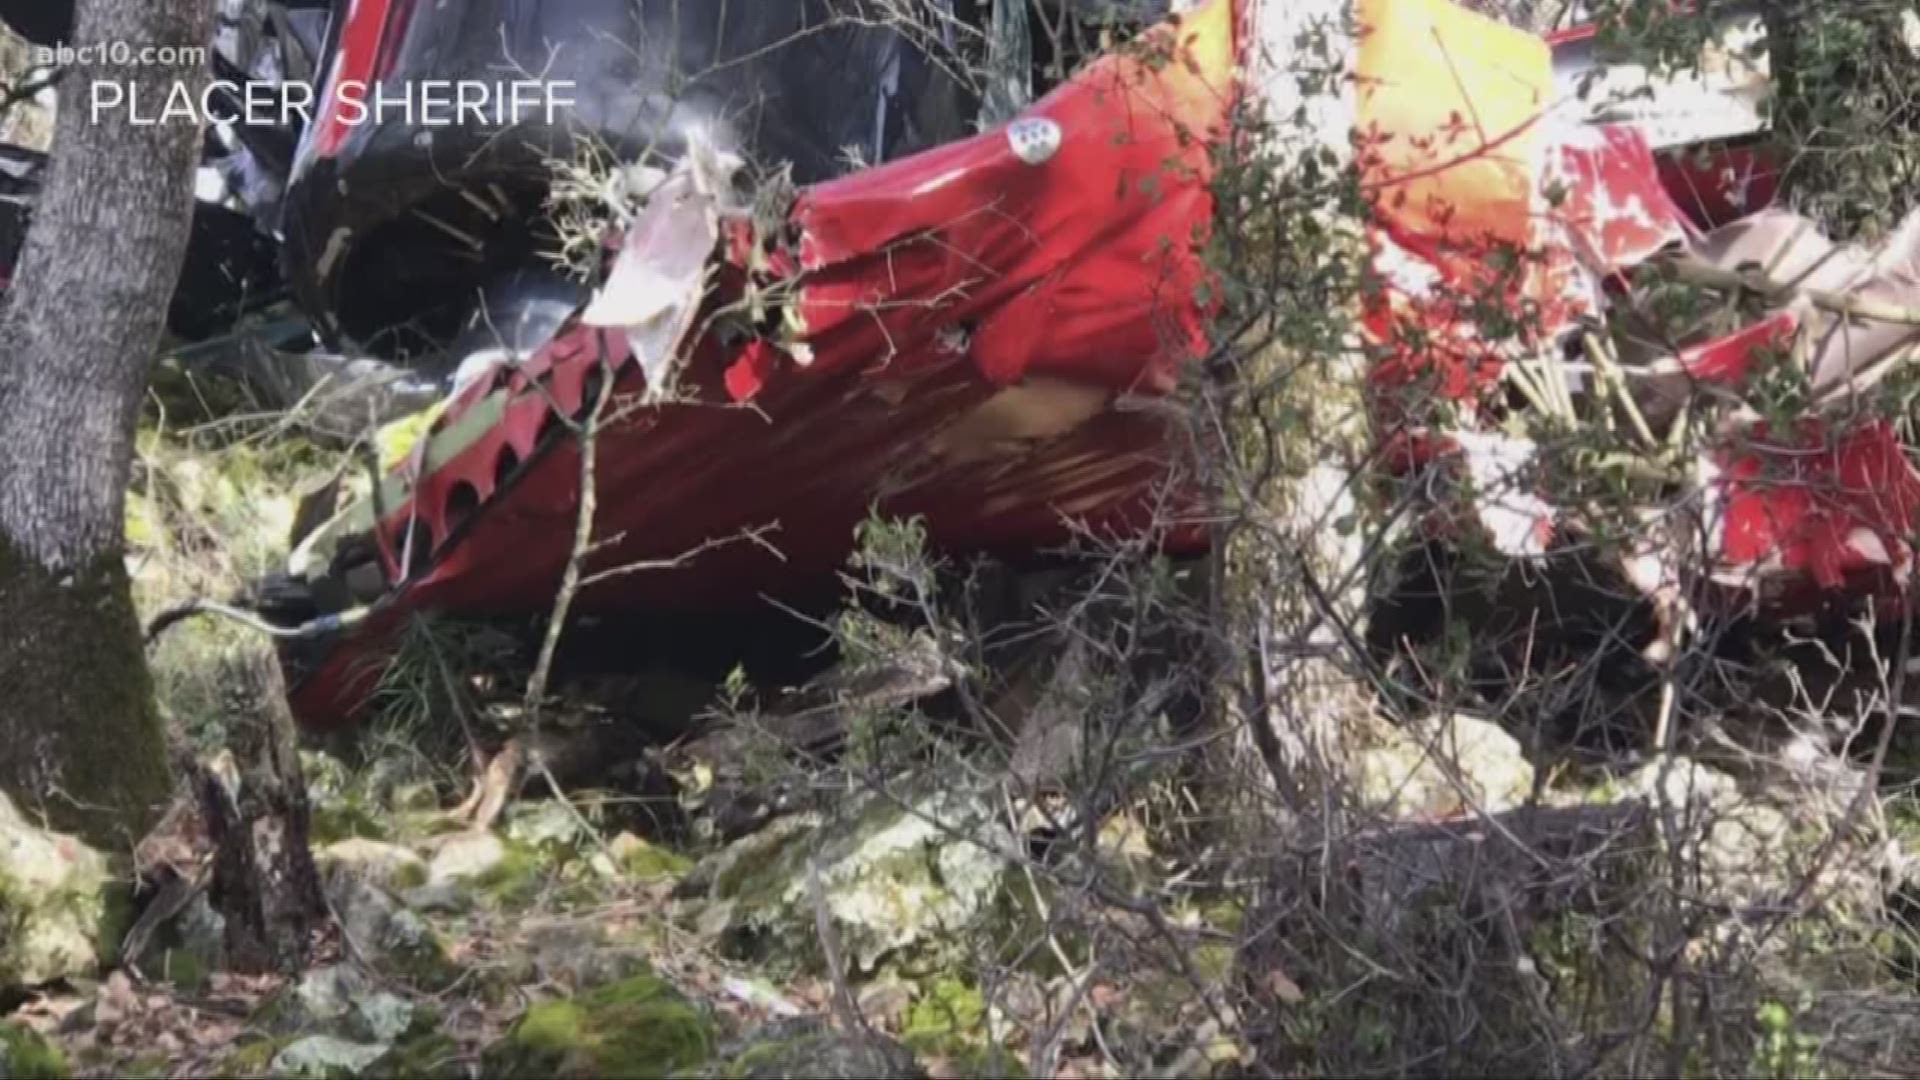 The plane a father and son duo were flying when they died in an Auburn, California crash on Friday had just had its engine replaced weeks prior, a friend told ABC10